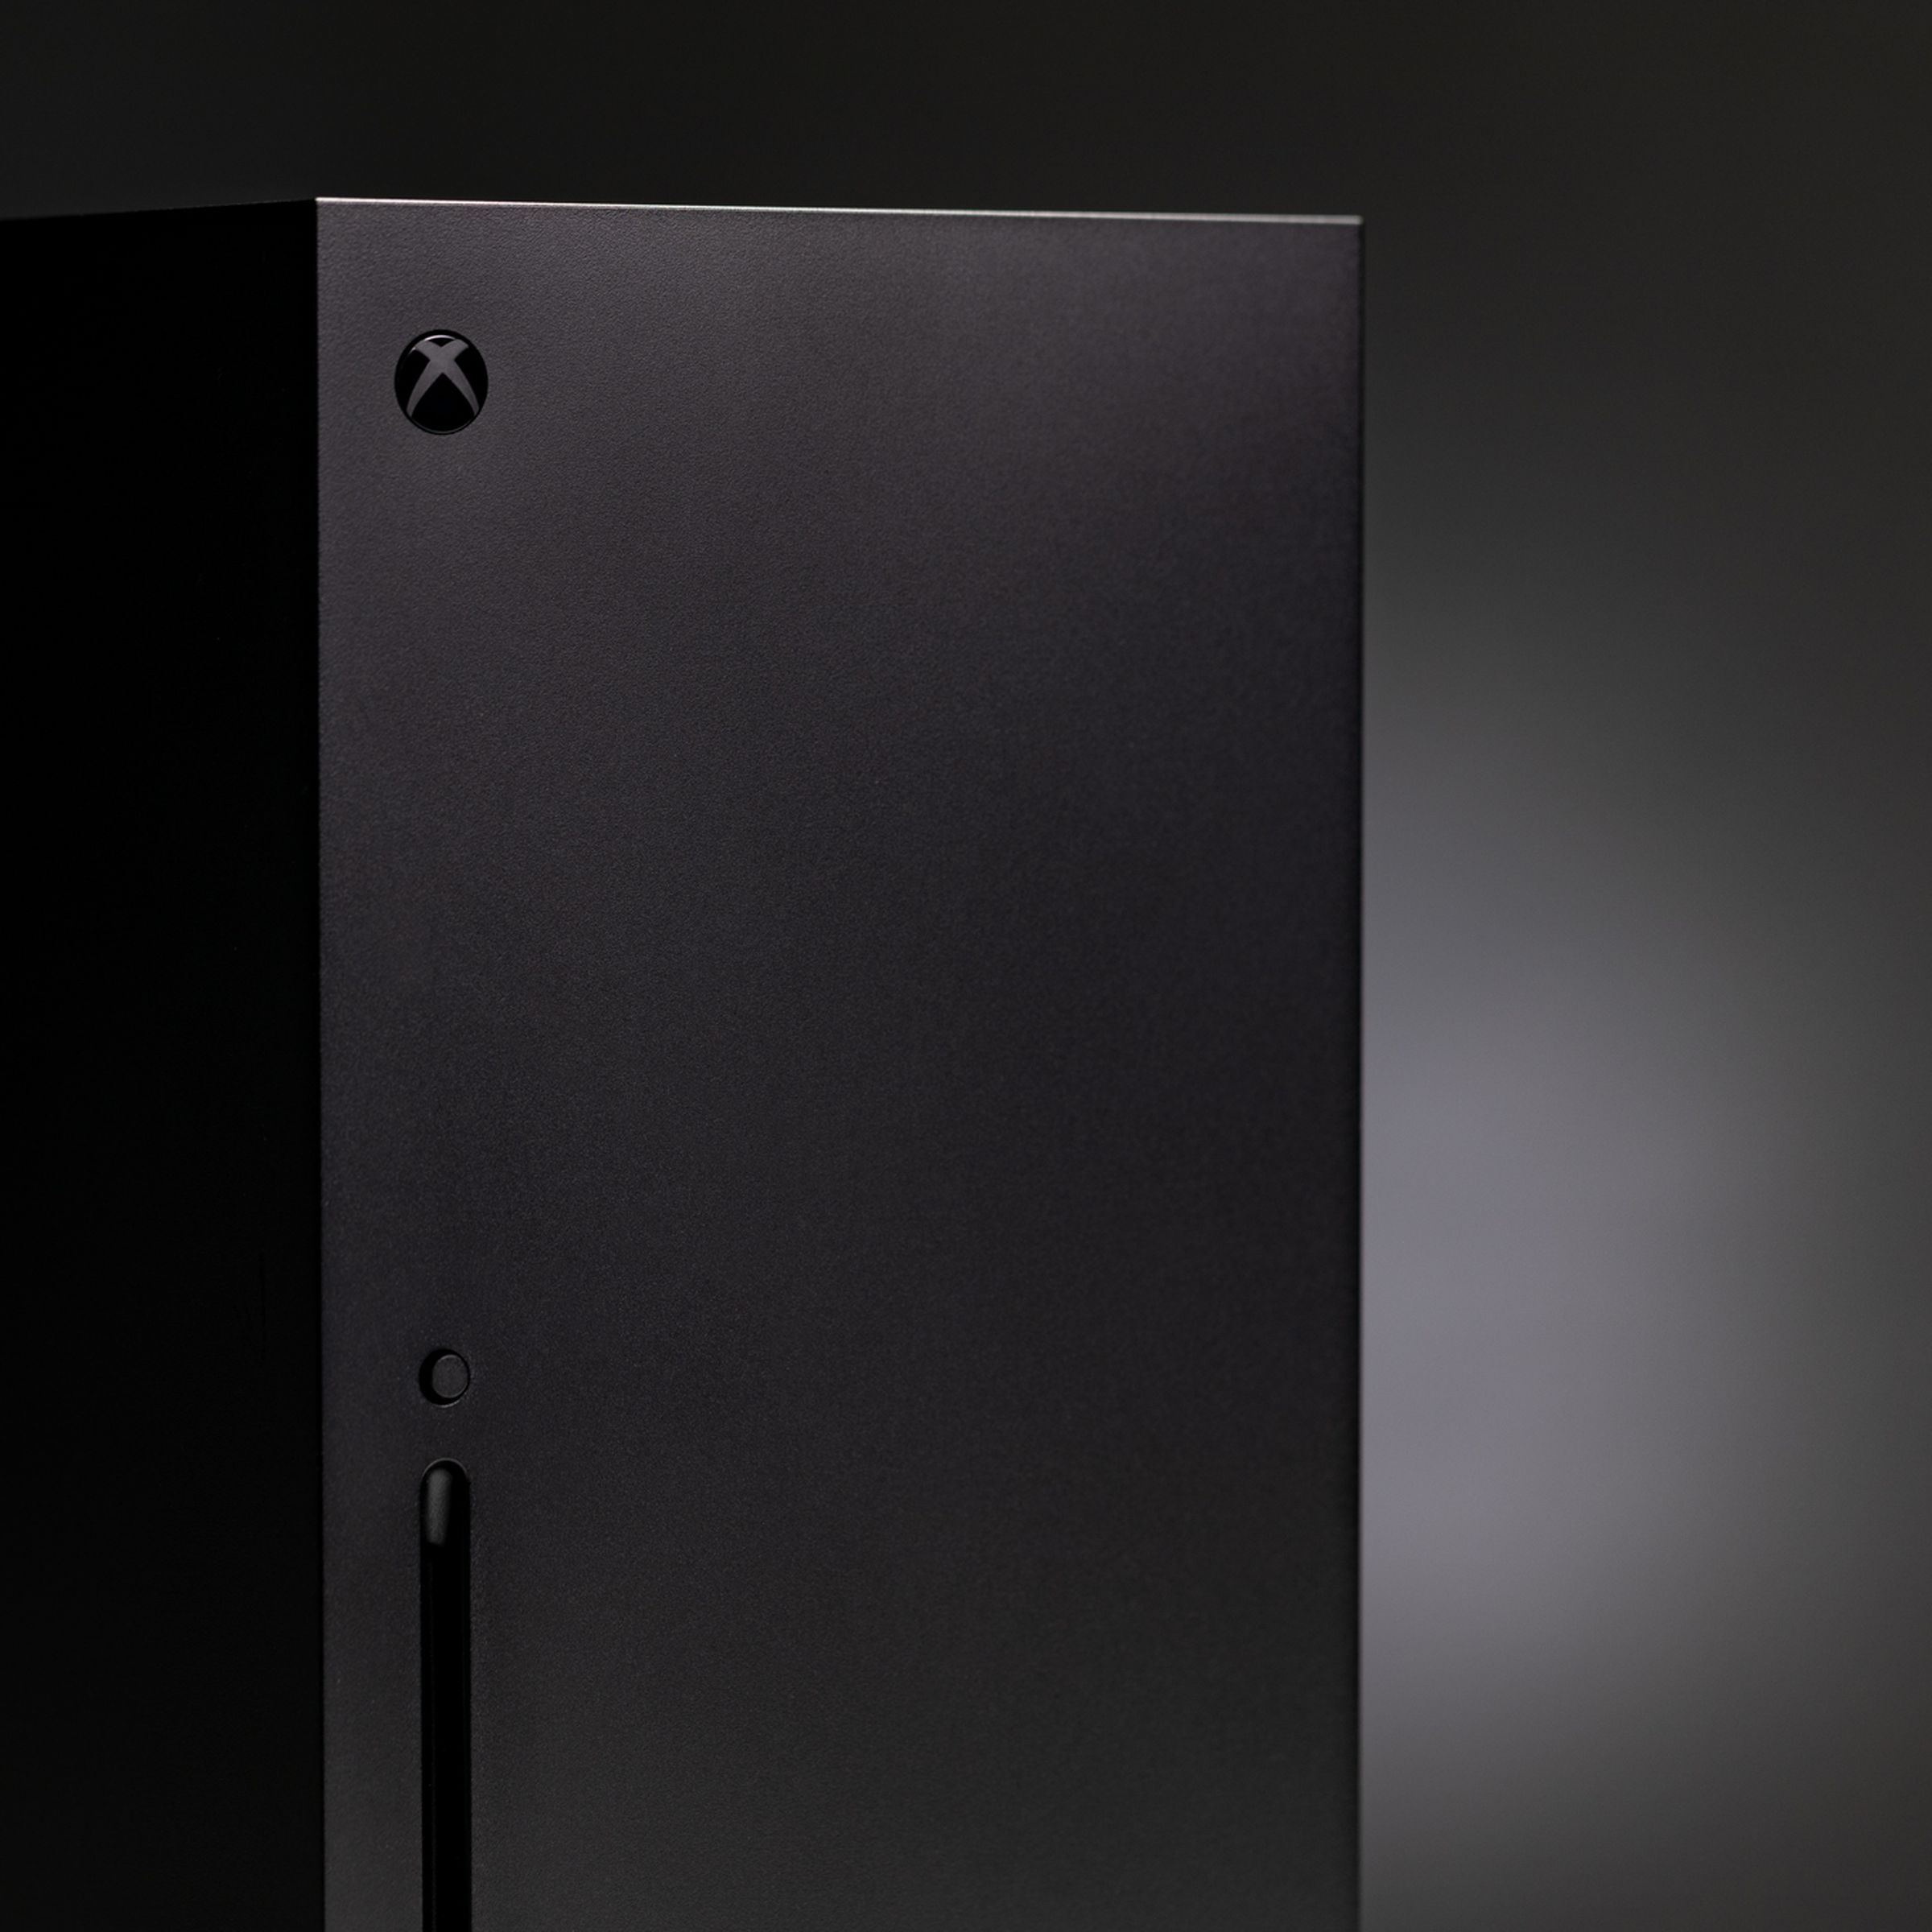 The Xbox Series X in front of a black background.